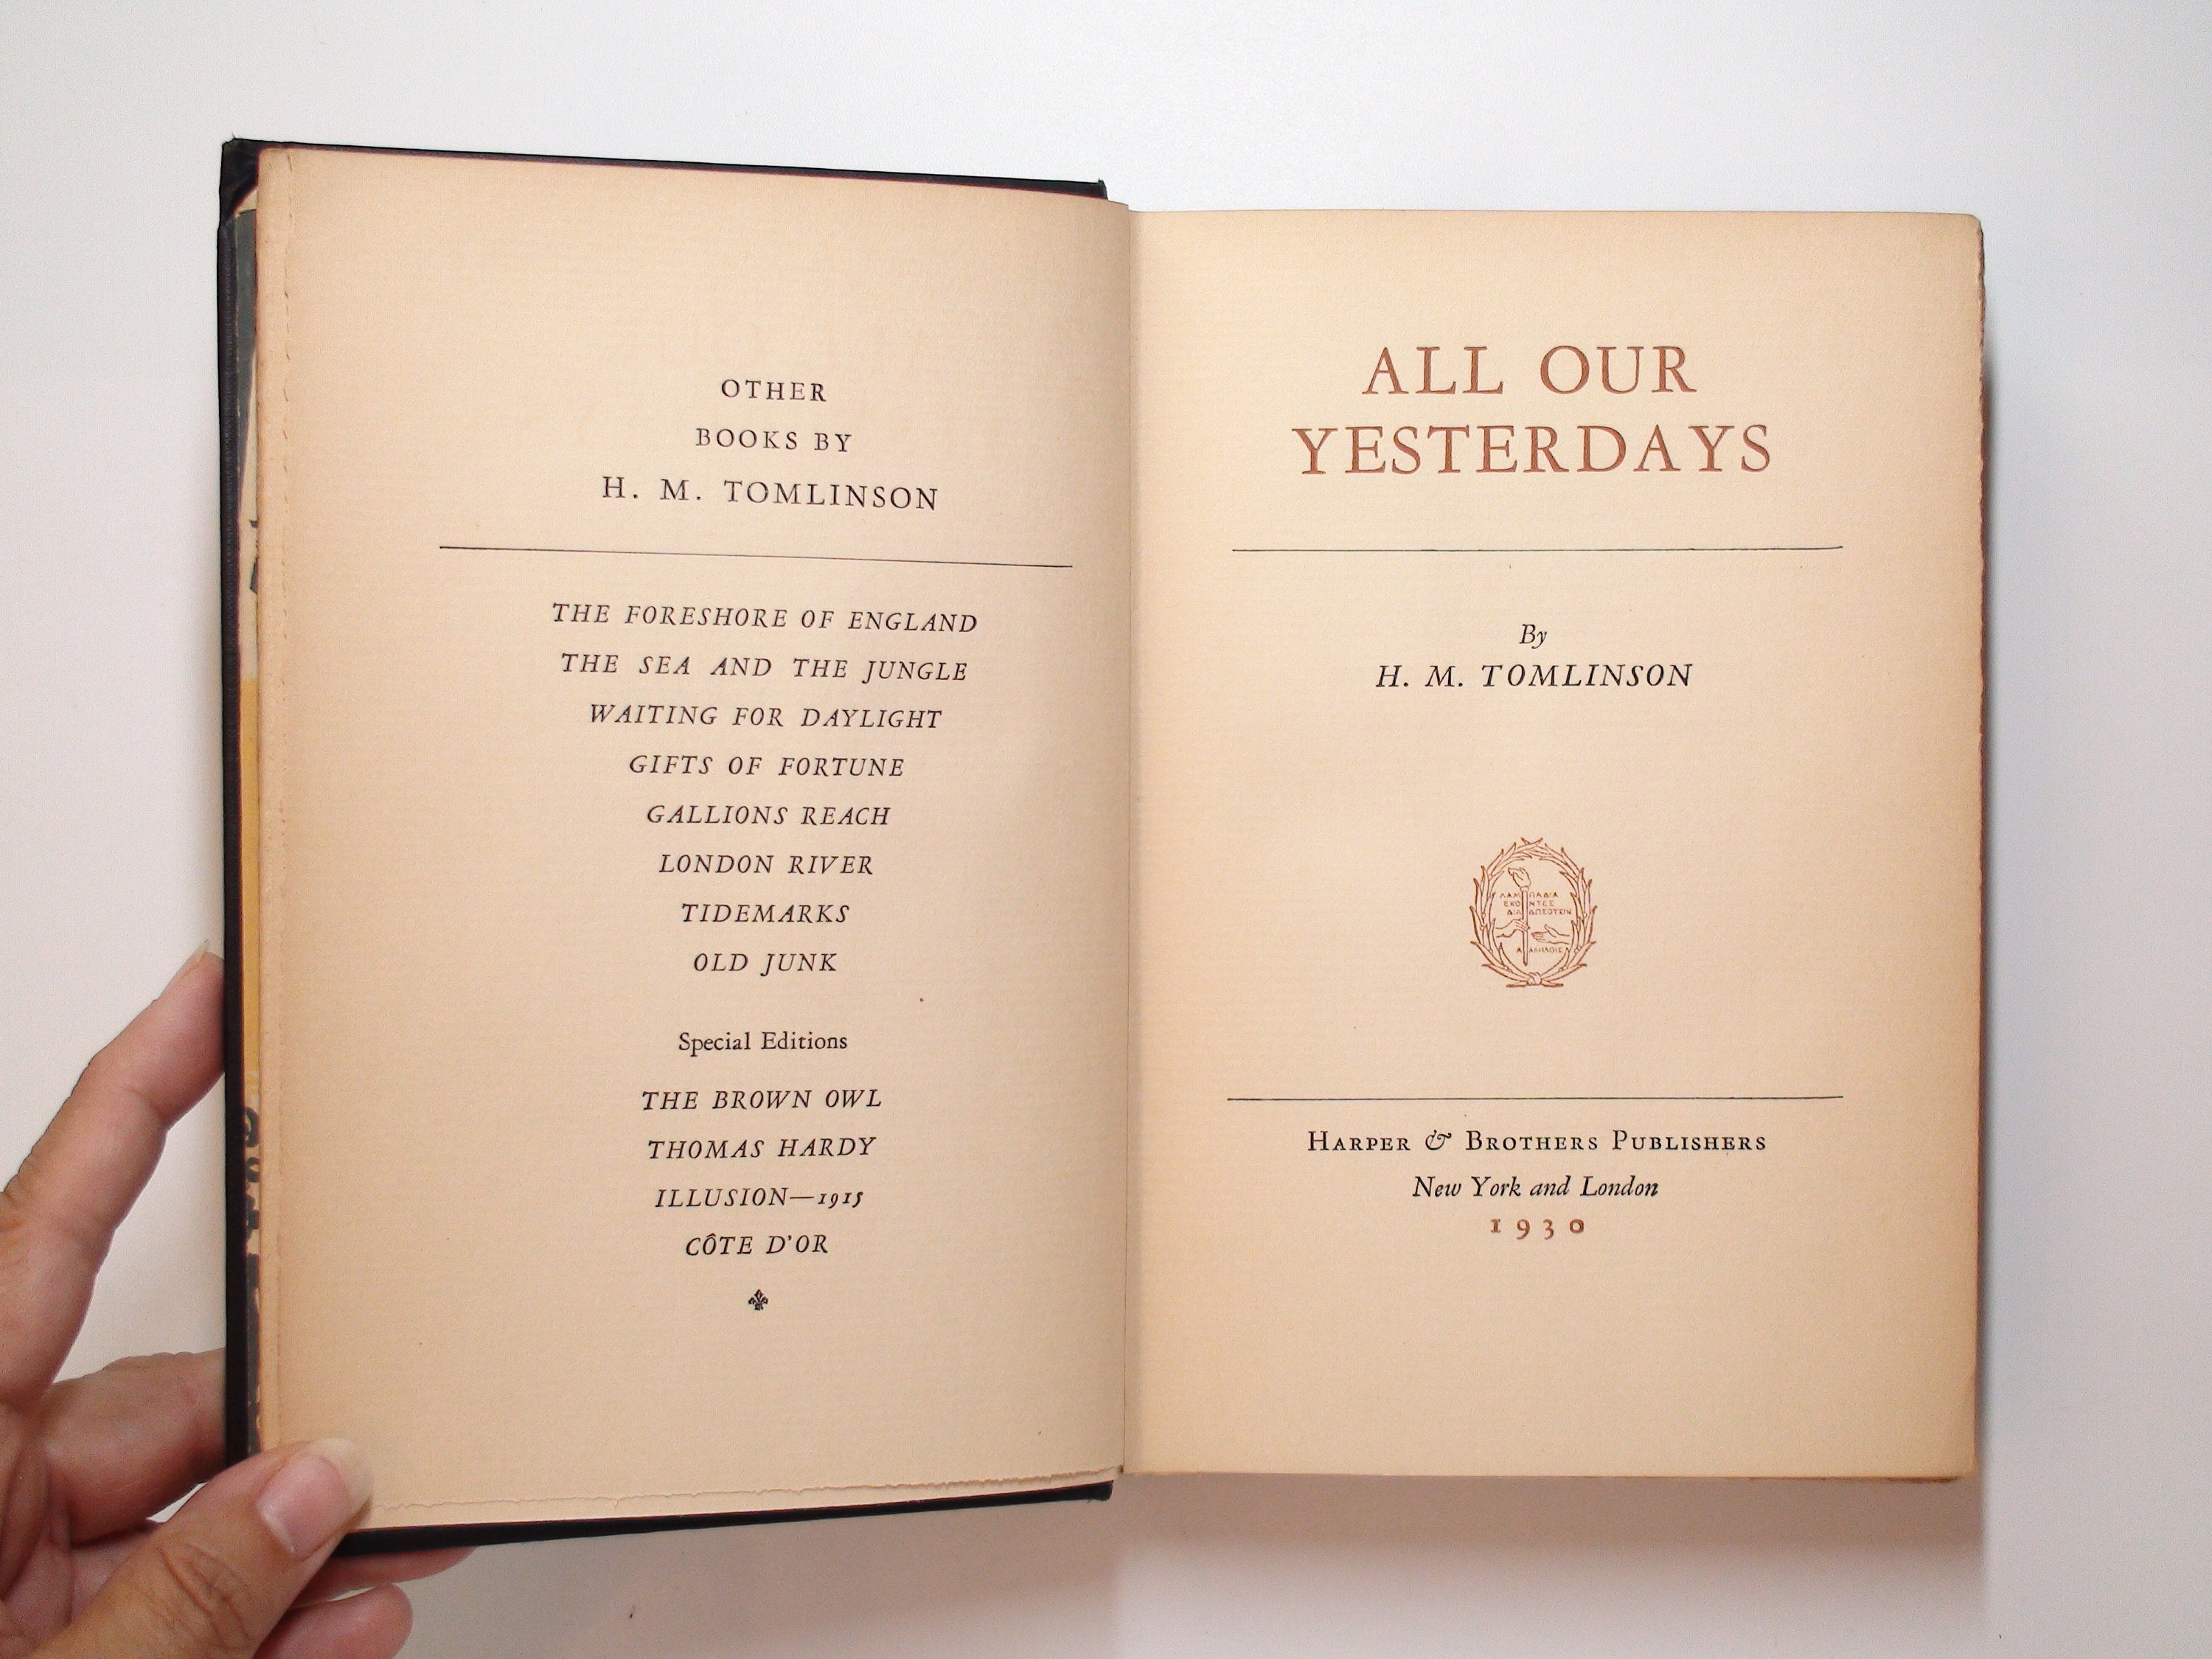 All Our Yesterdays, by H. M. Tomlinson, Stated 1st Ed, 1930